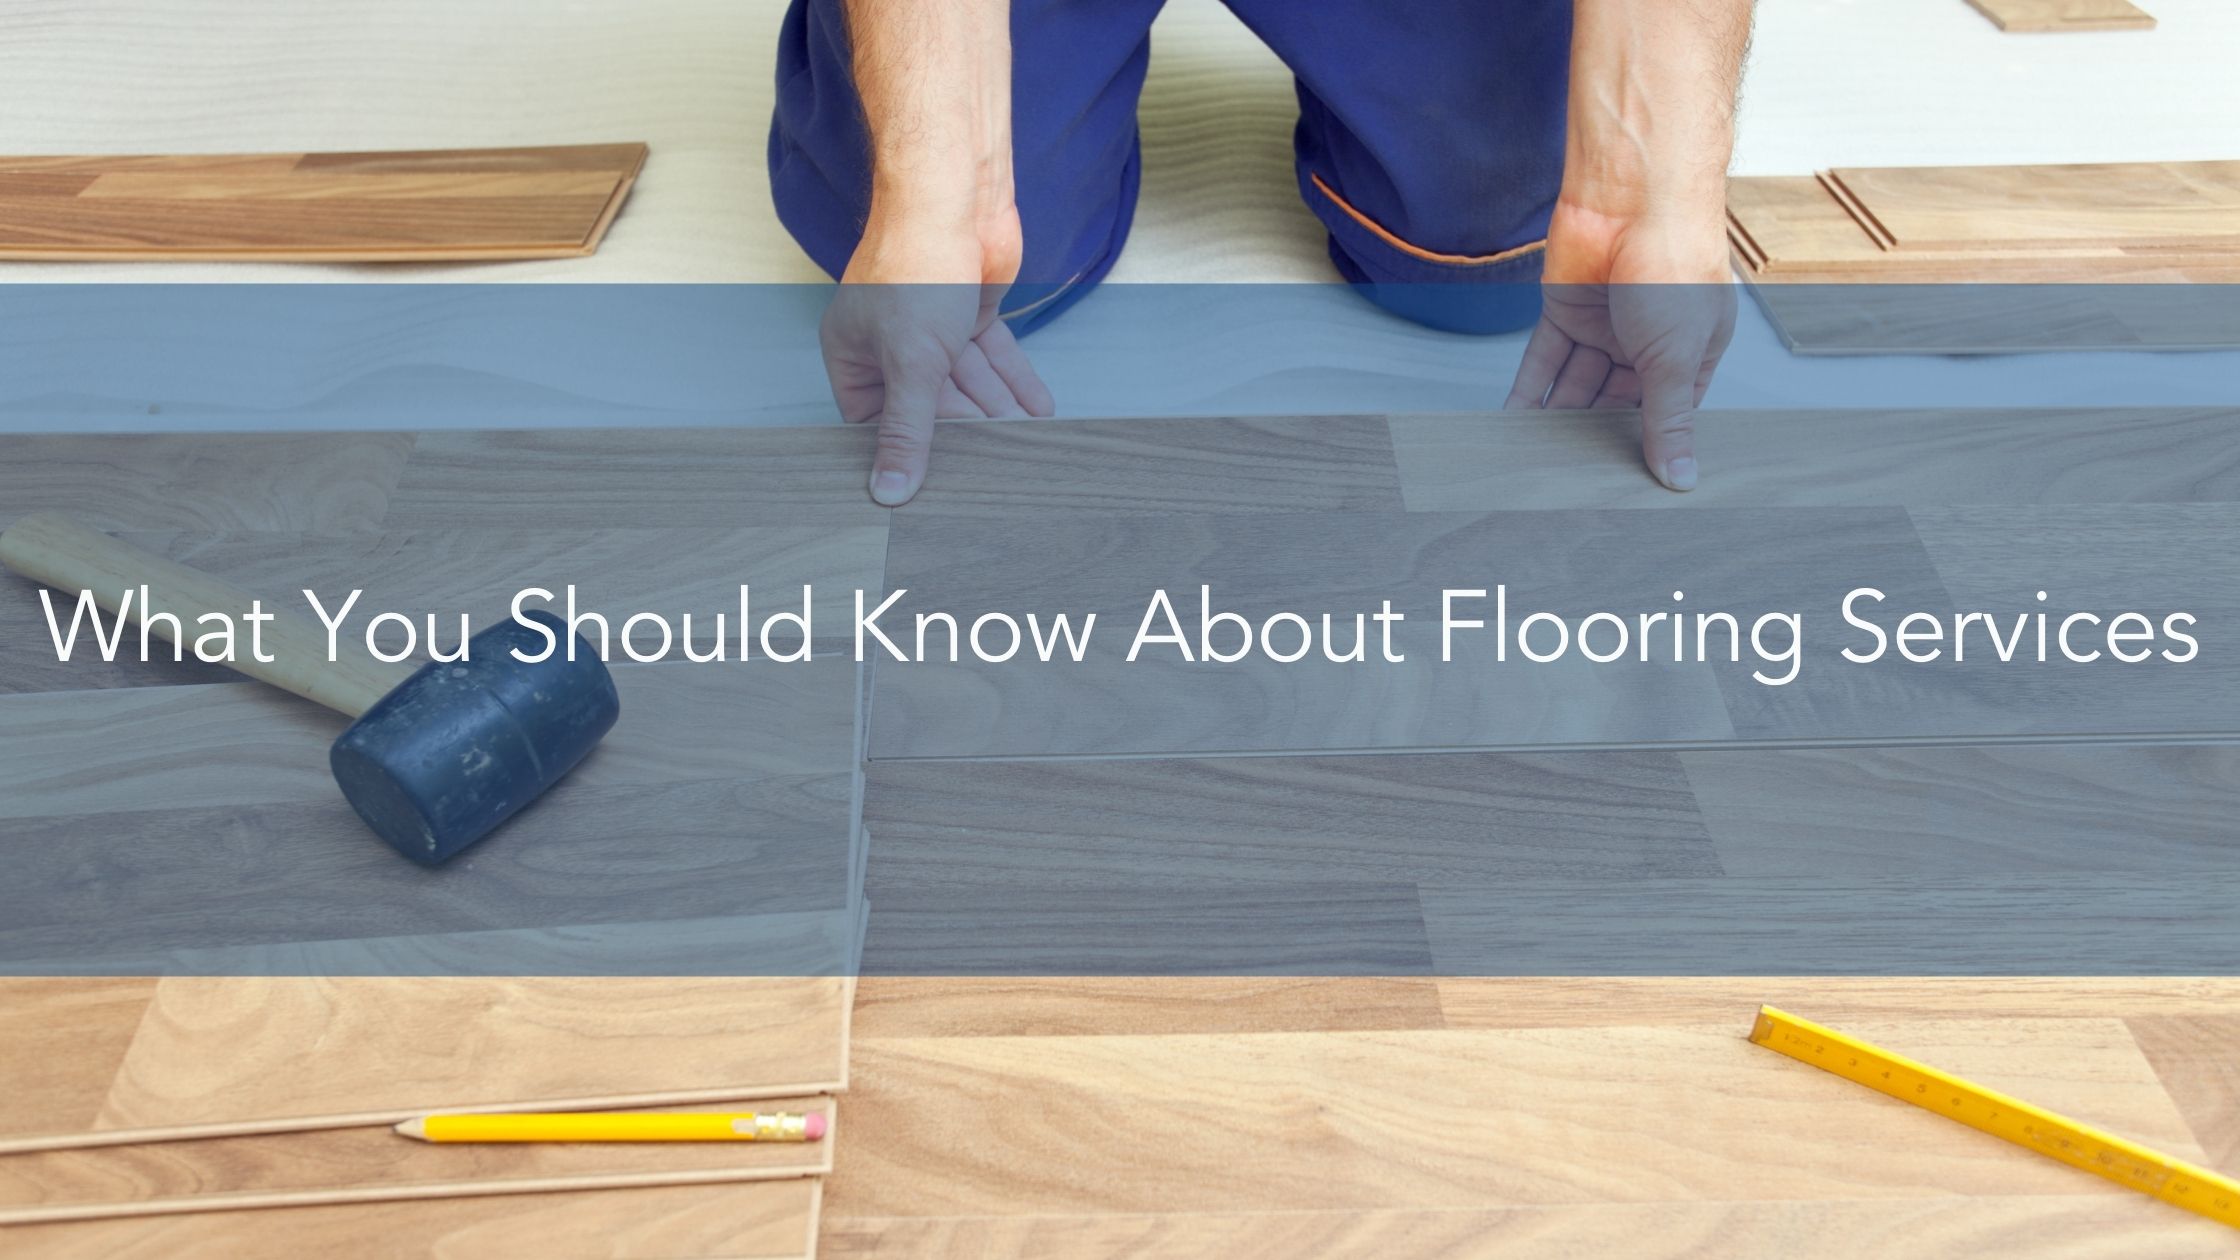 What You Should Know About Flooring Services